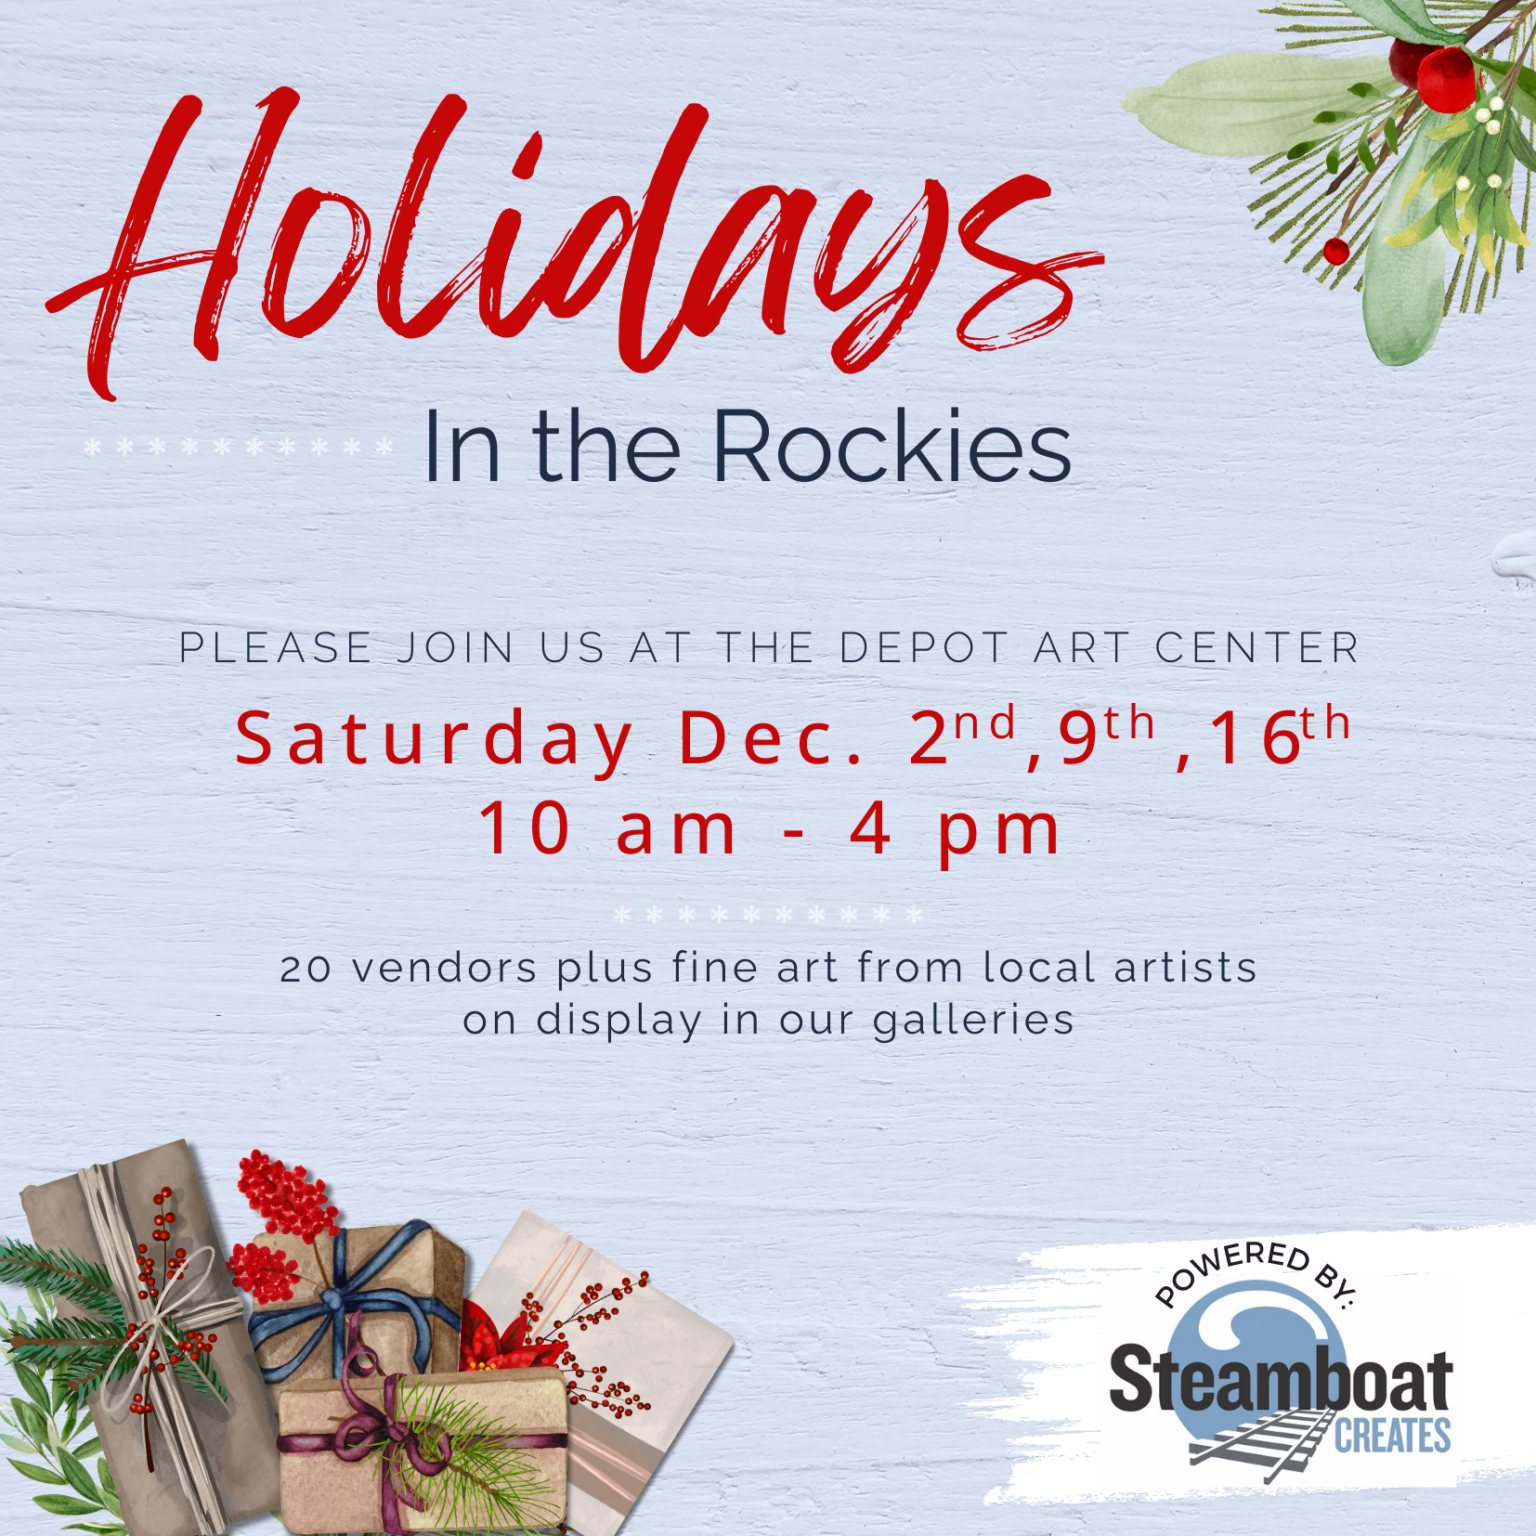 Holidays in the Rockies flyer